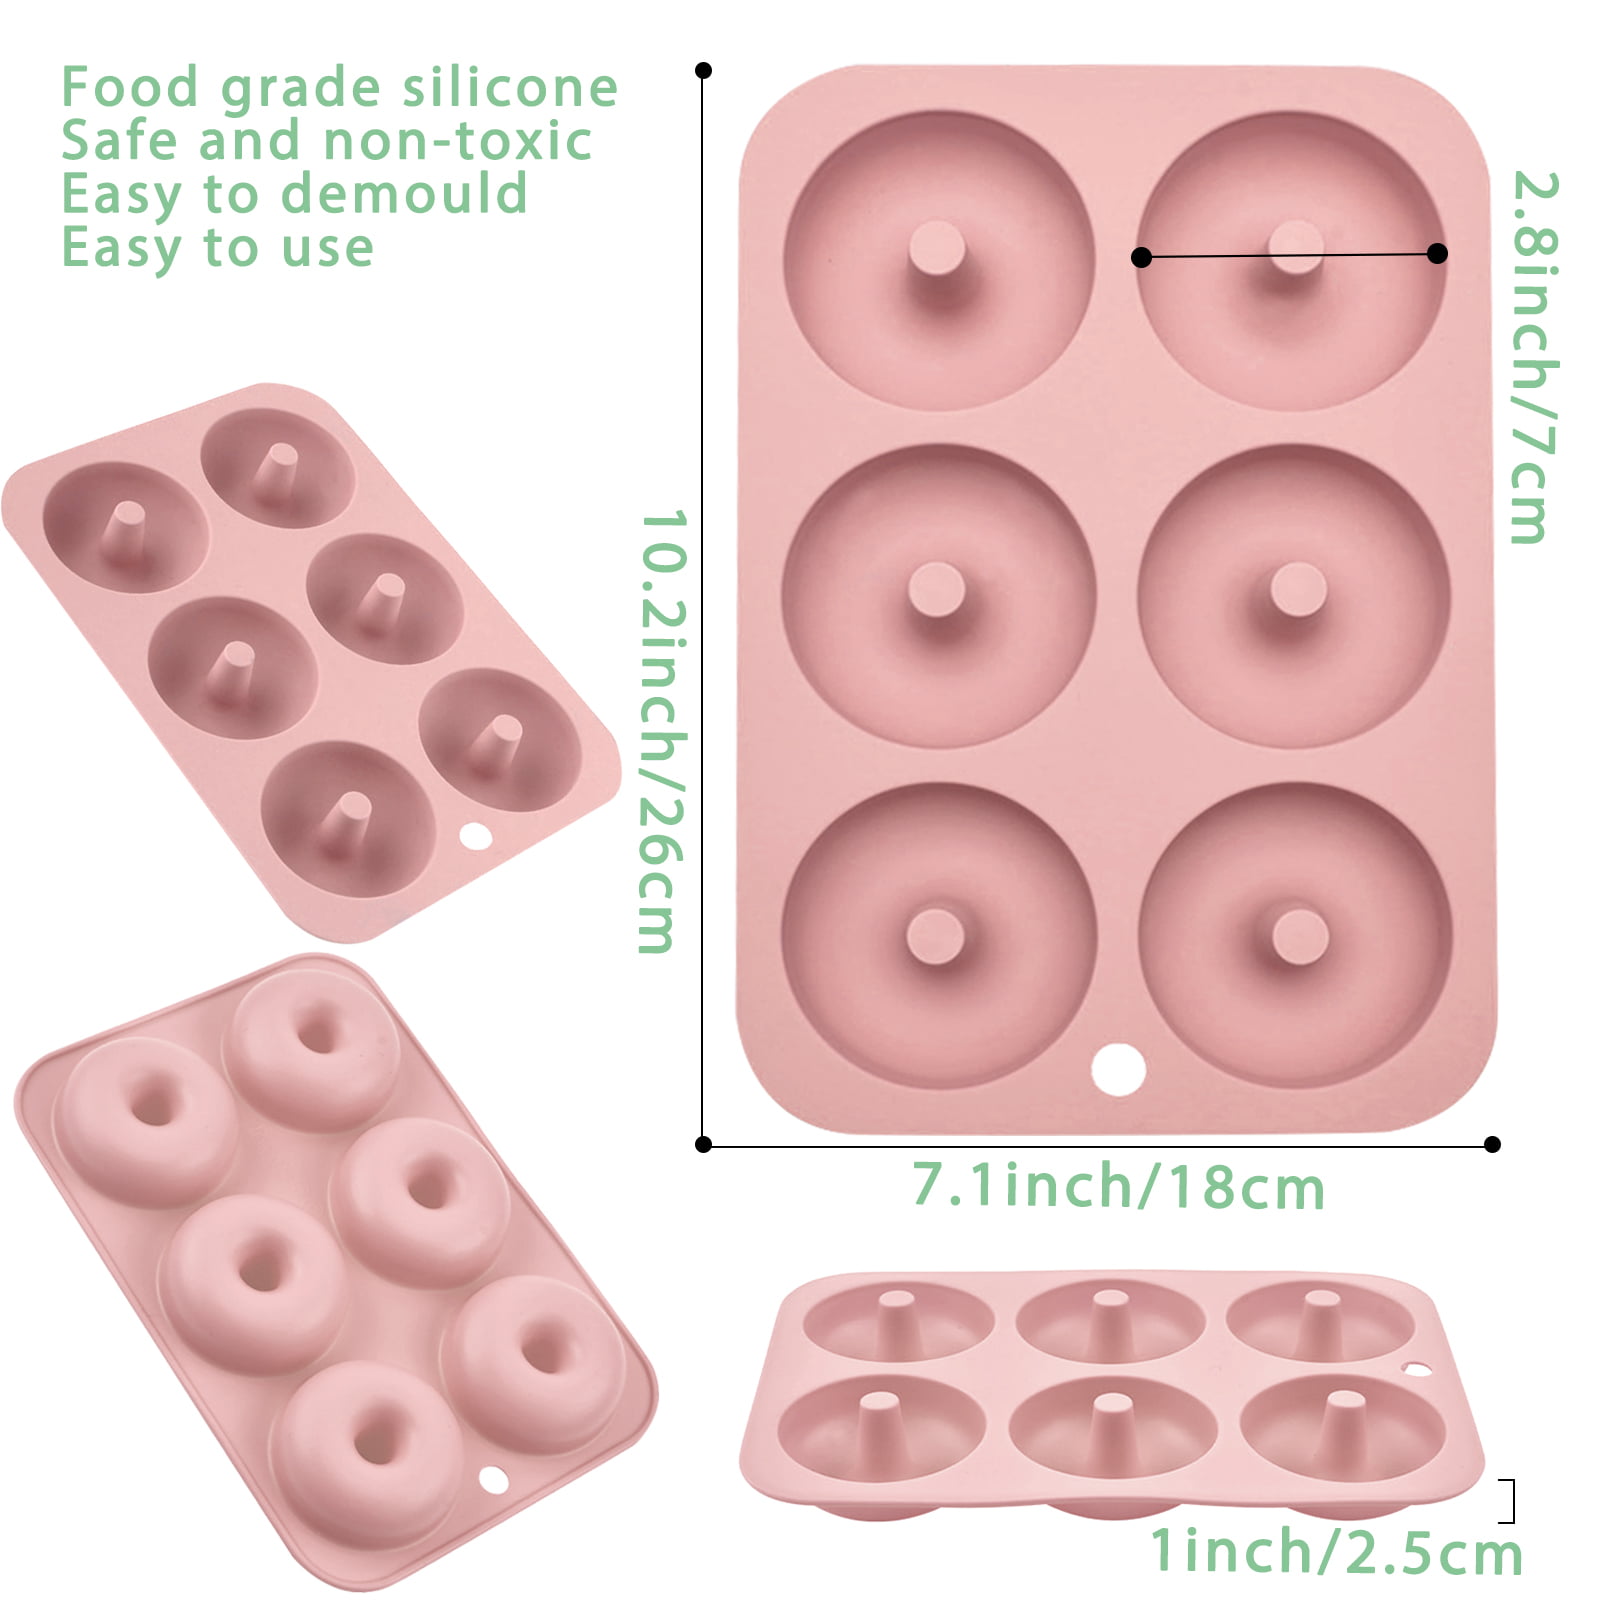 HEHALI 3pcs Donut Pan, Non-Stick Silicone Donut Mold, Bagel Doughnuts Pan  for Baking in Clearance, Tray Measures 10x7 Inches